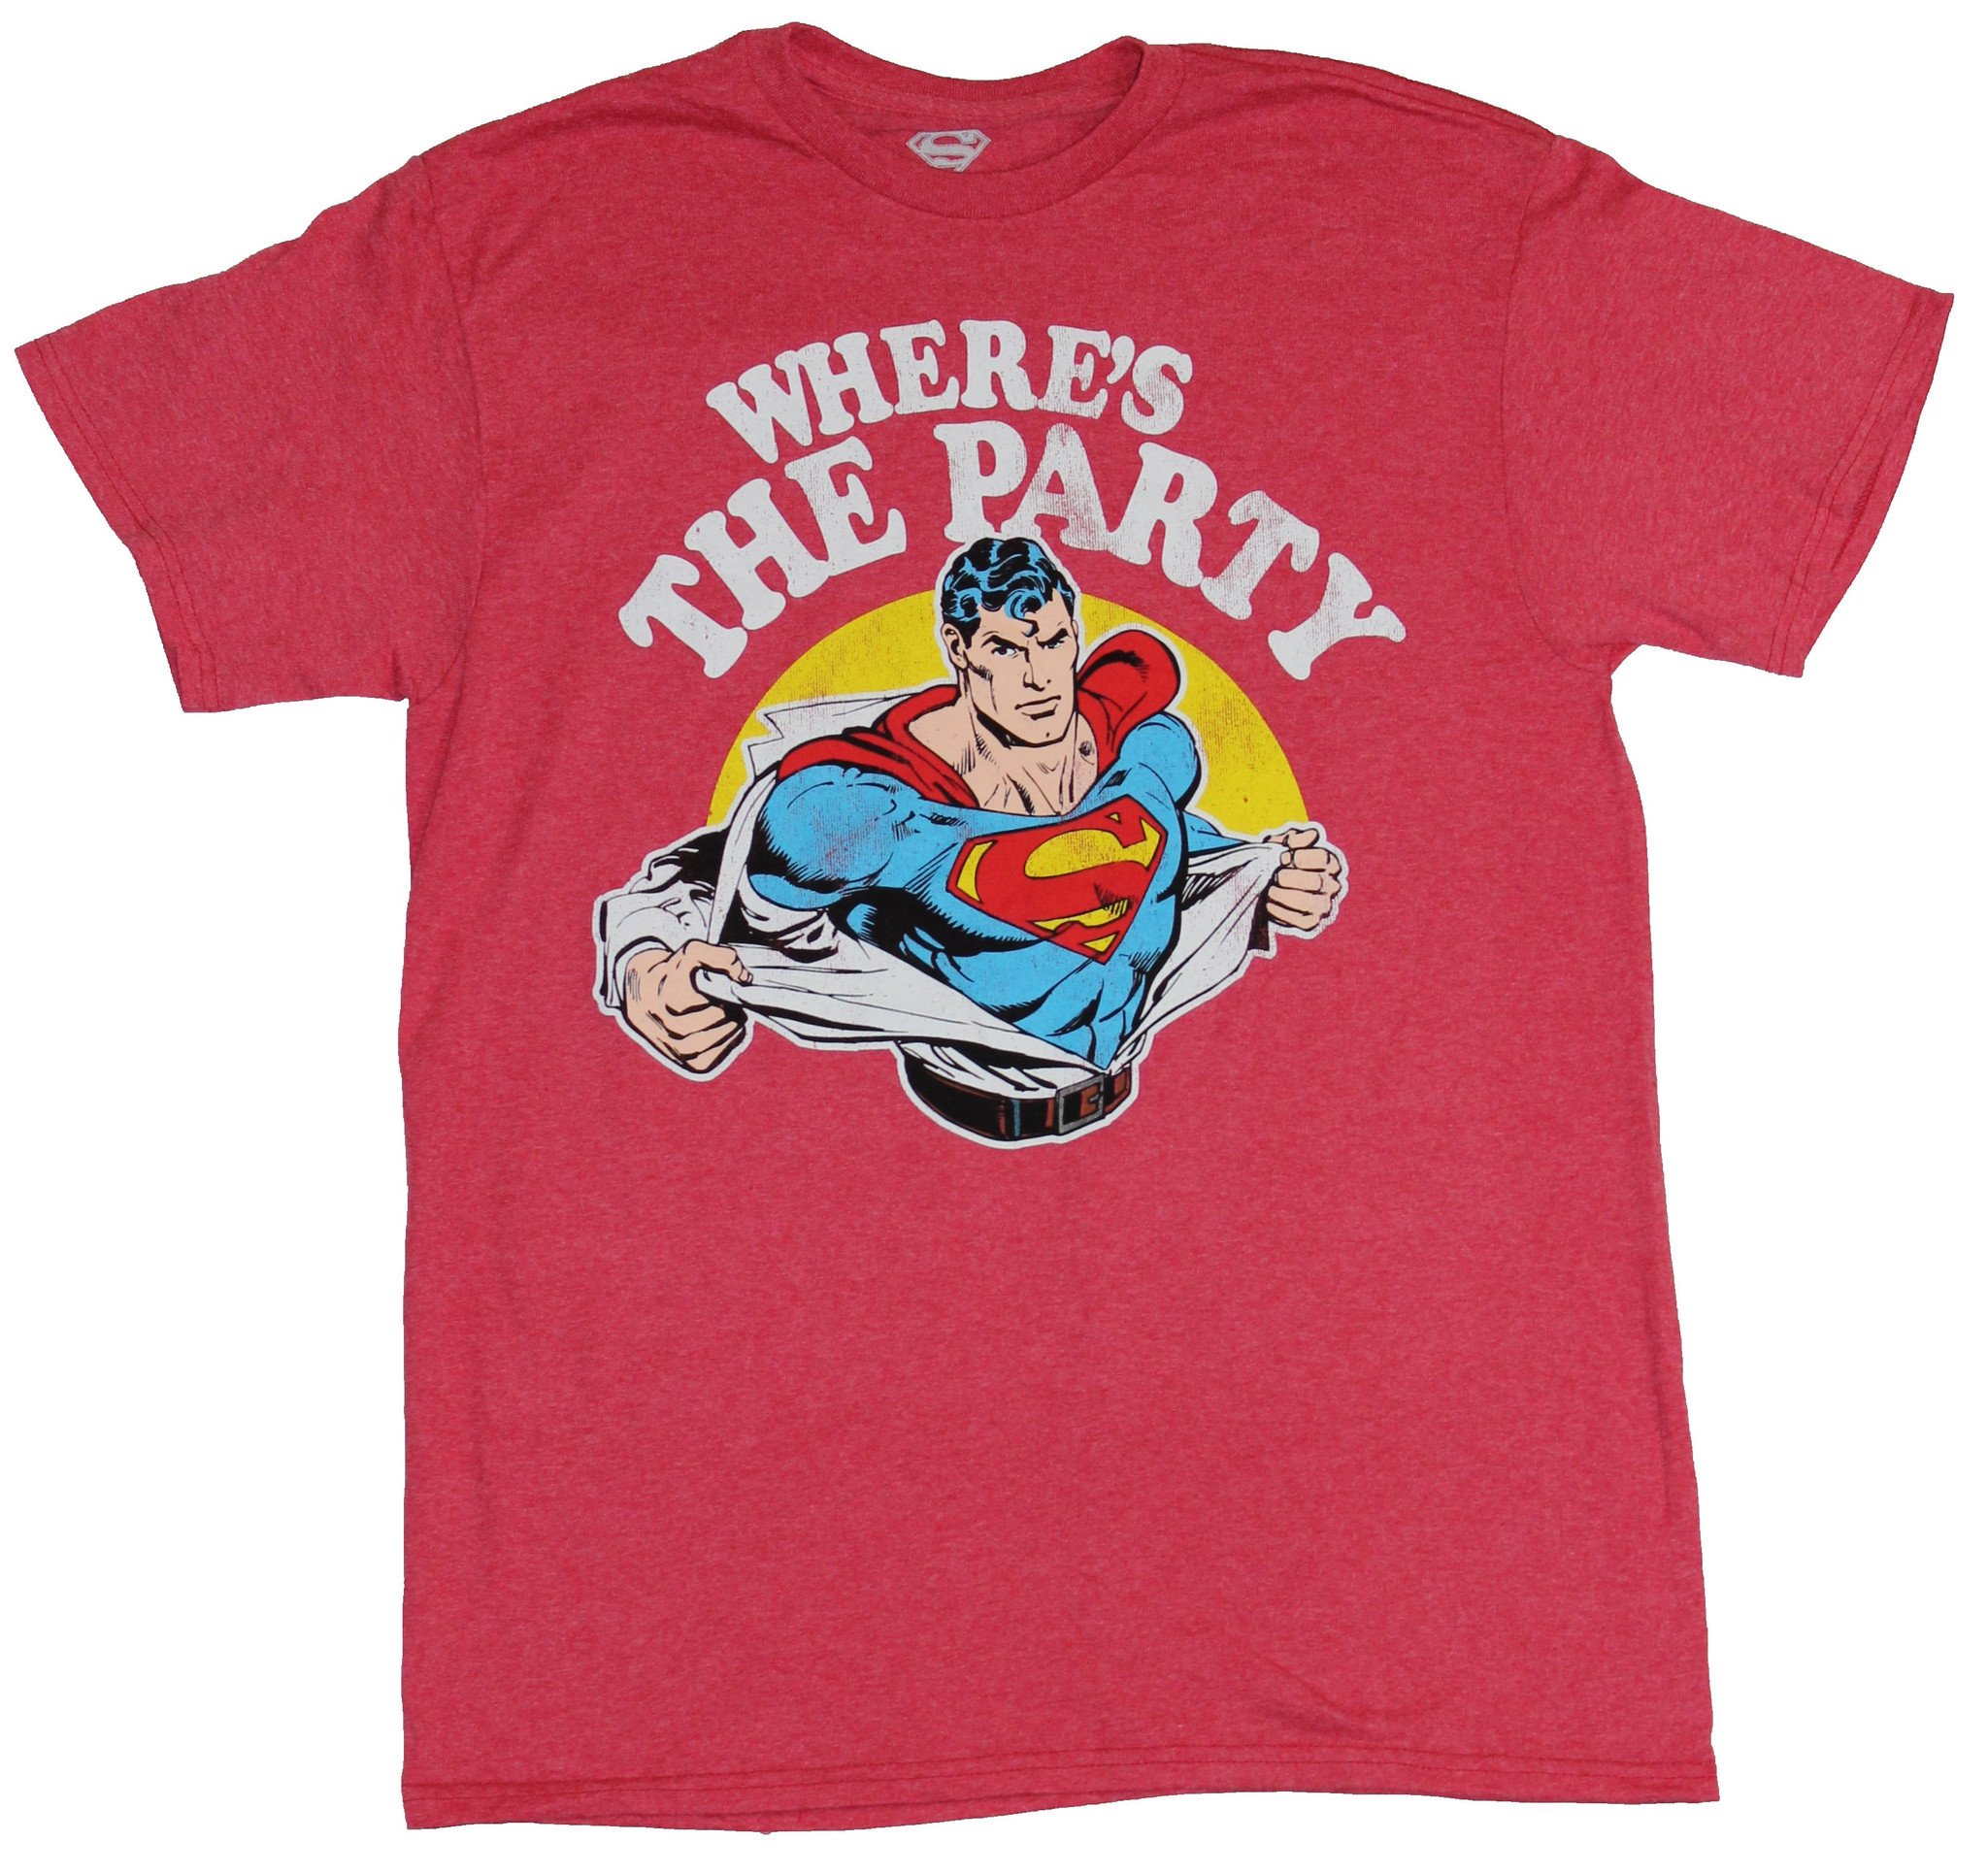 Superman (DC Comics)  Mens T-Shirt - Where's the Party Shirt Ripping Supes Image (Small) - image 1 of 1